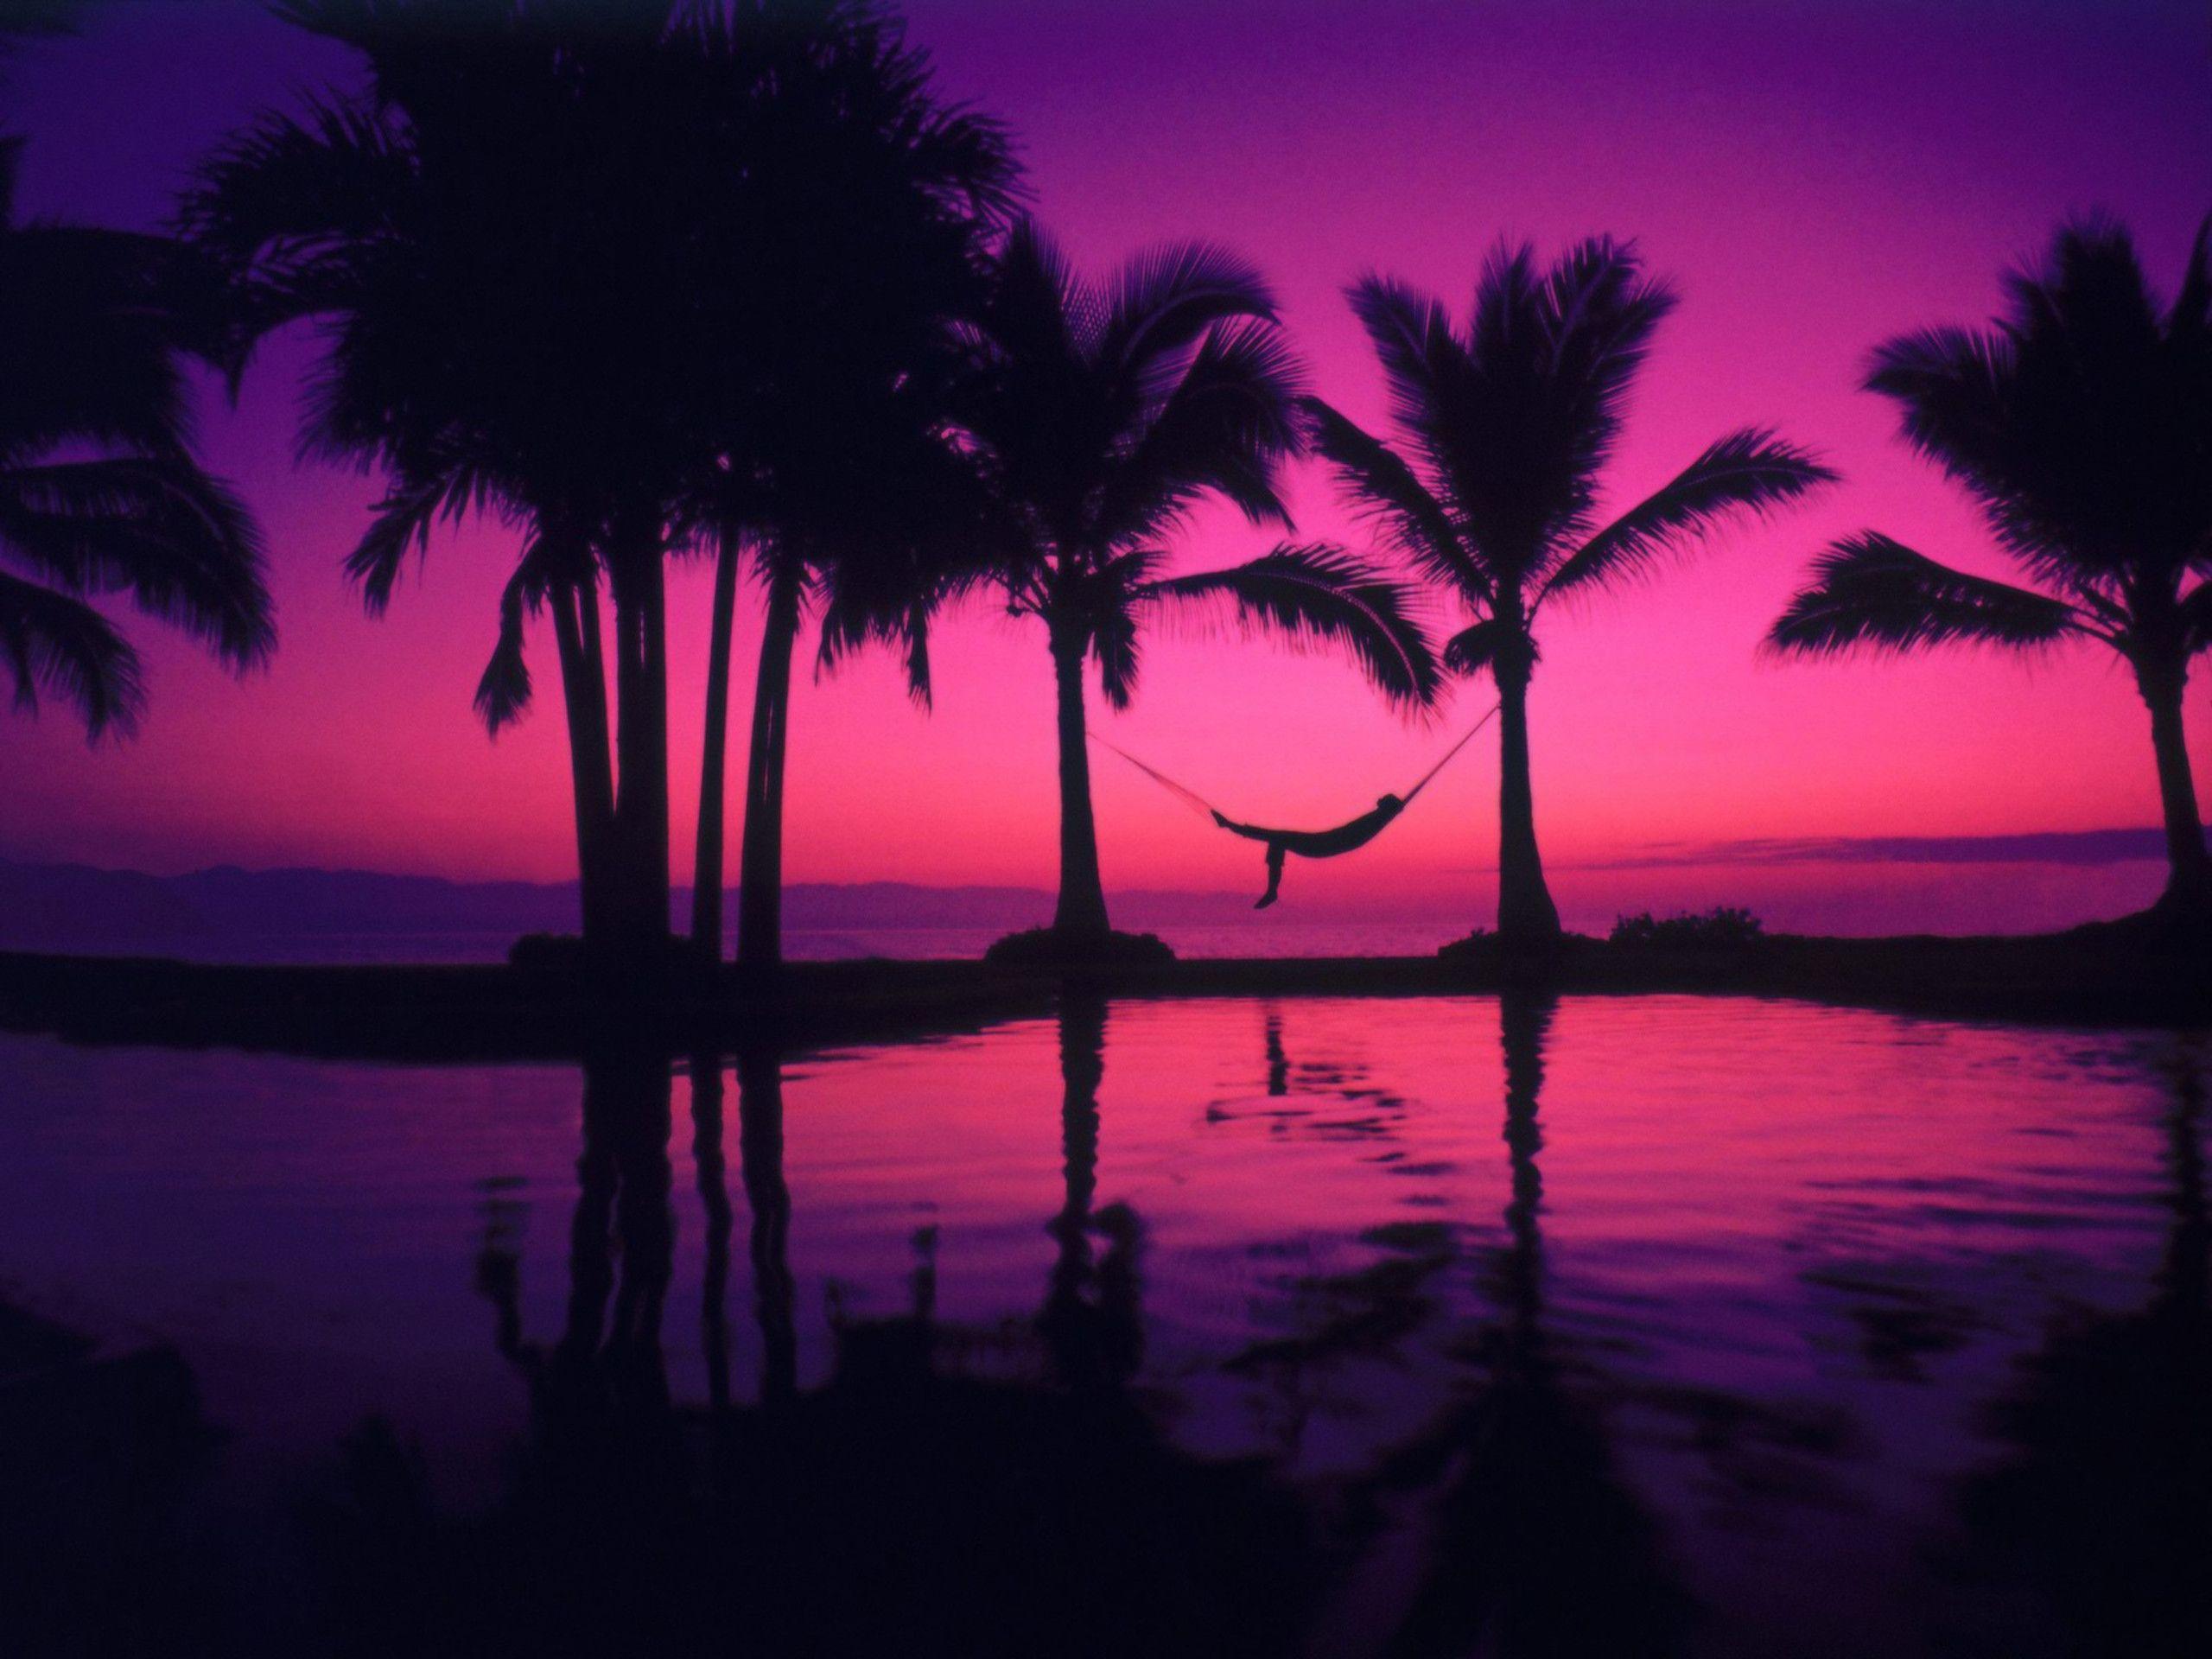 Colorful Beach Sunsets Wallpapers 14836 Hd Wallpapers in Beach n